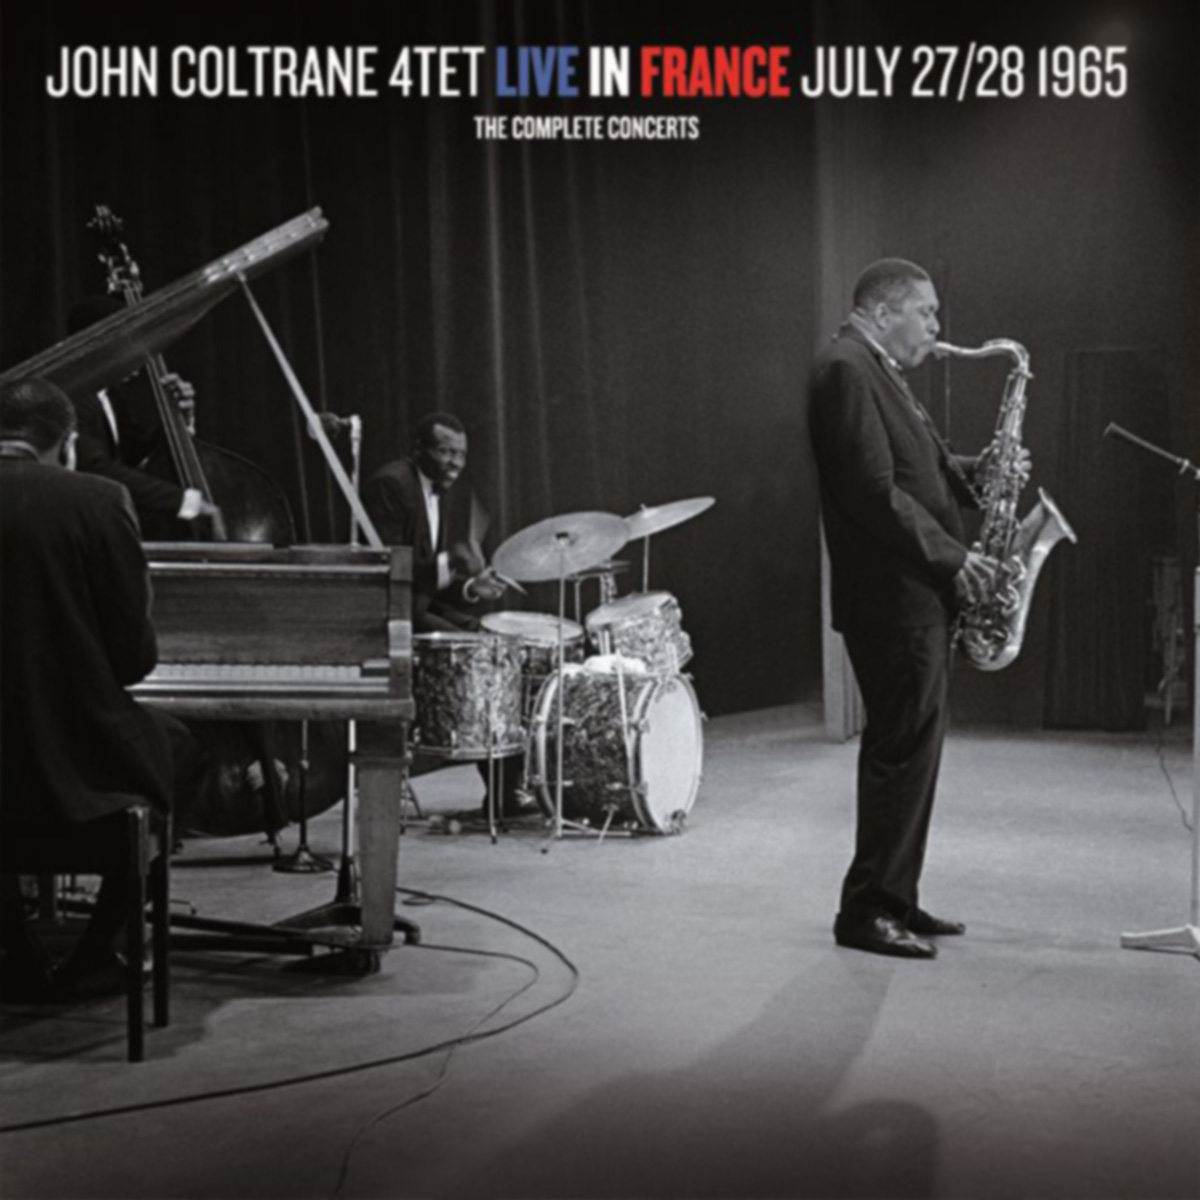 Live In France July 27/28 1968 - The Complete Concerts